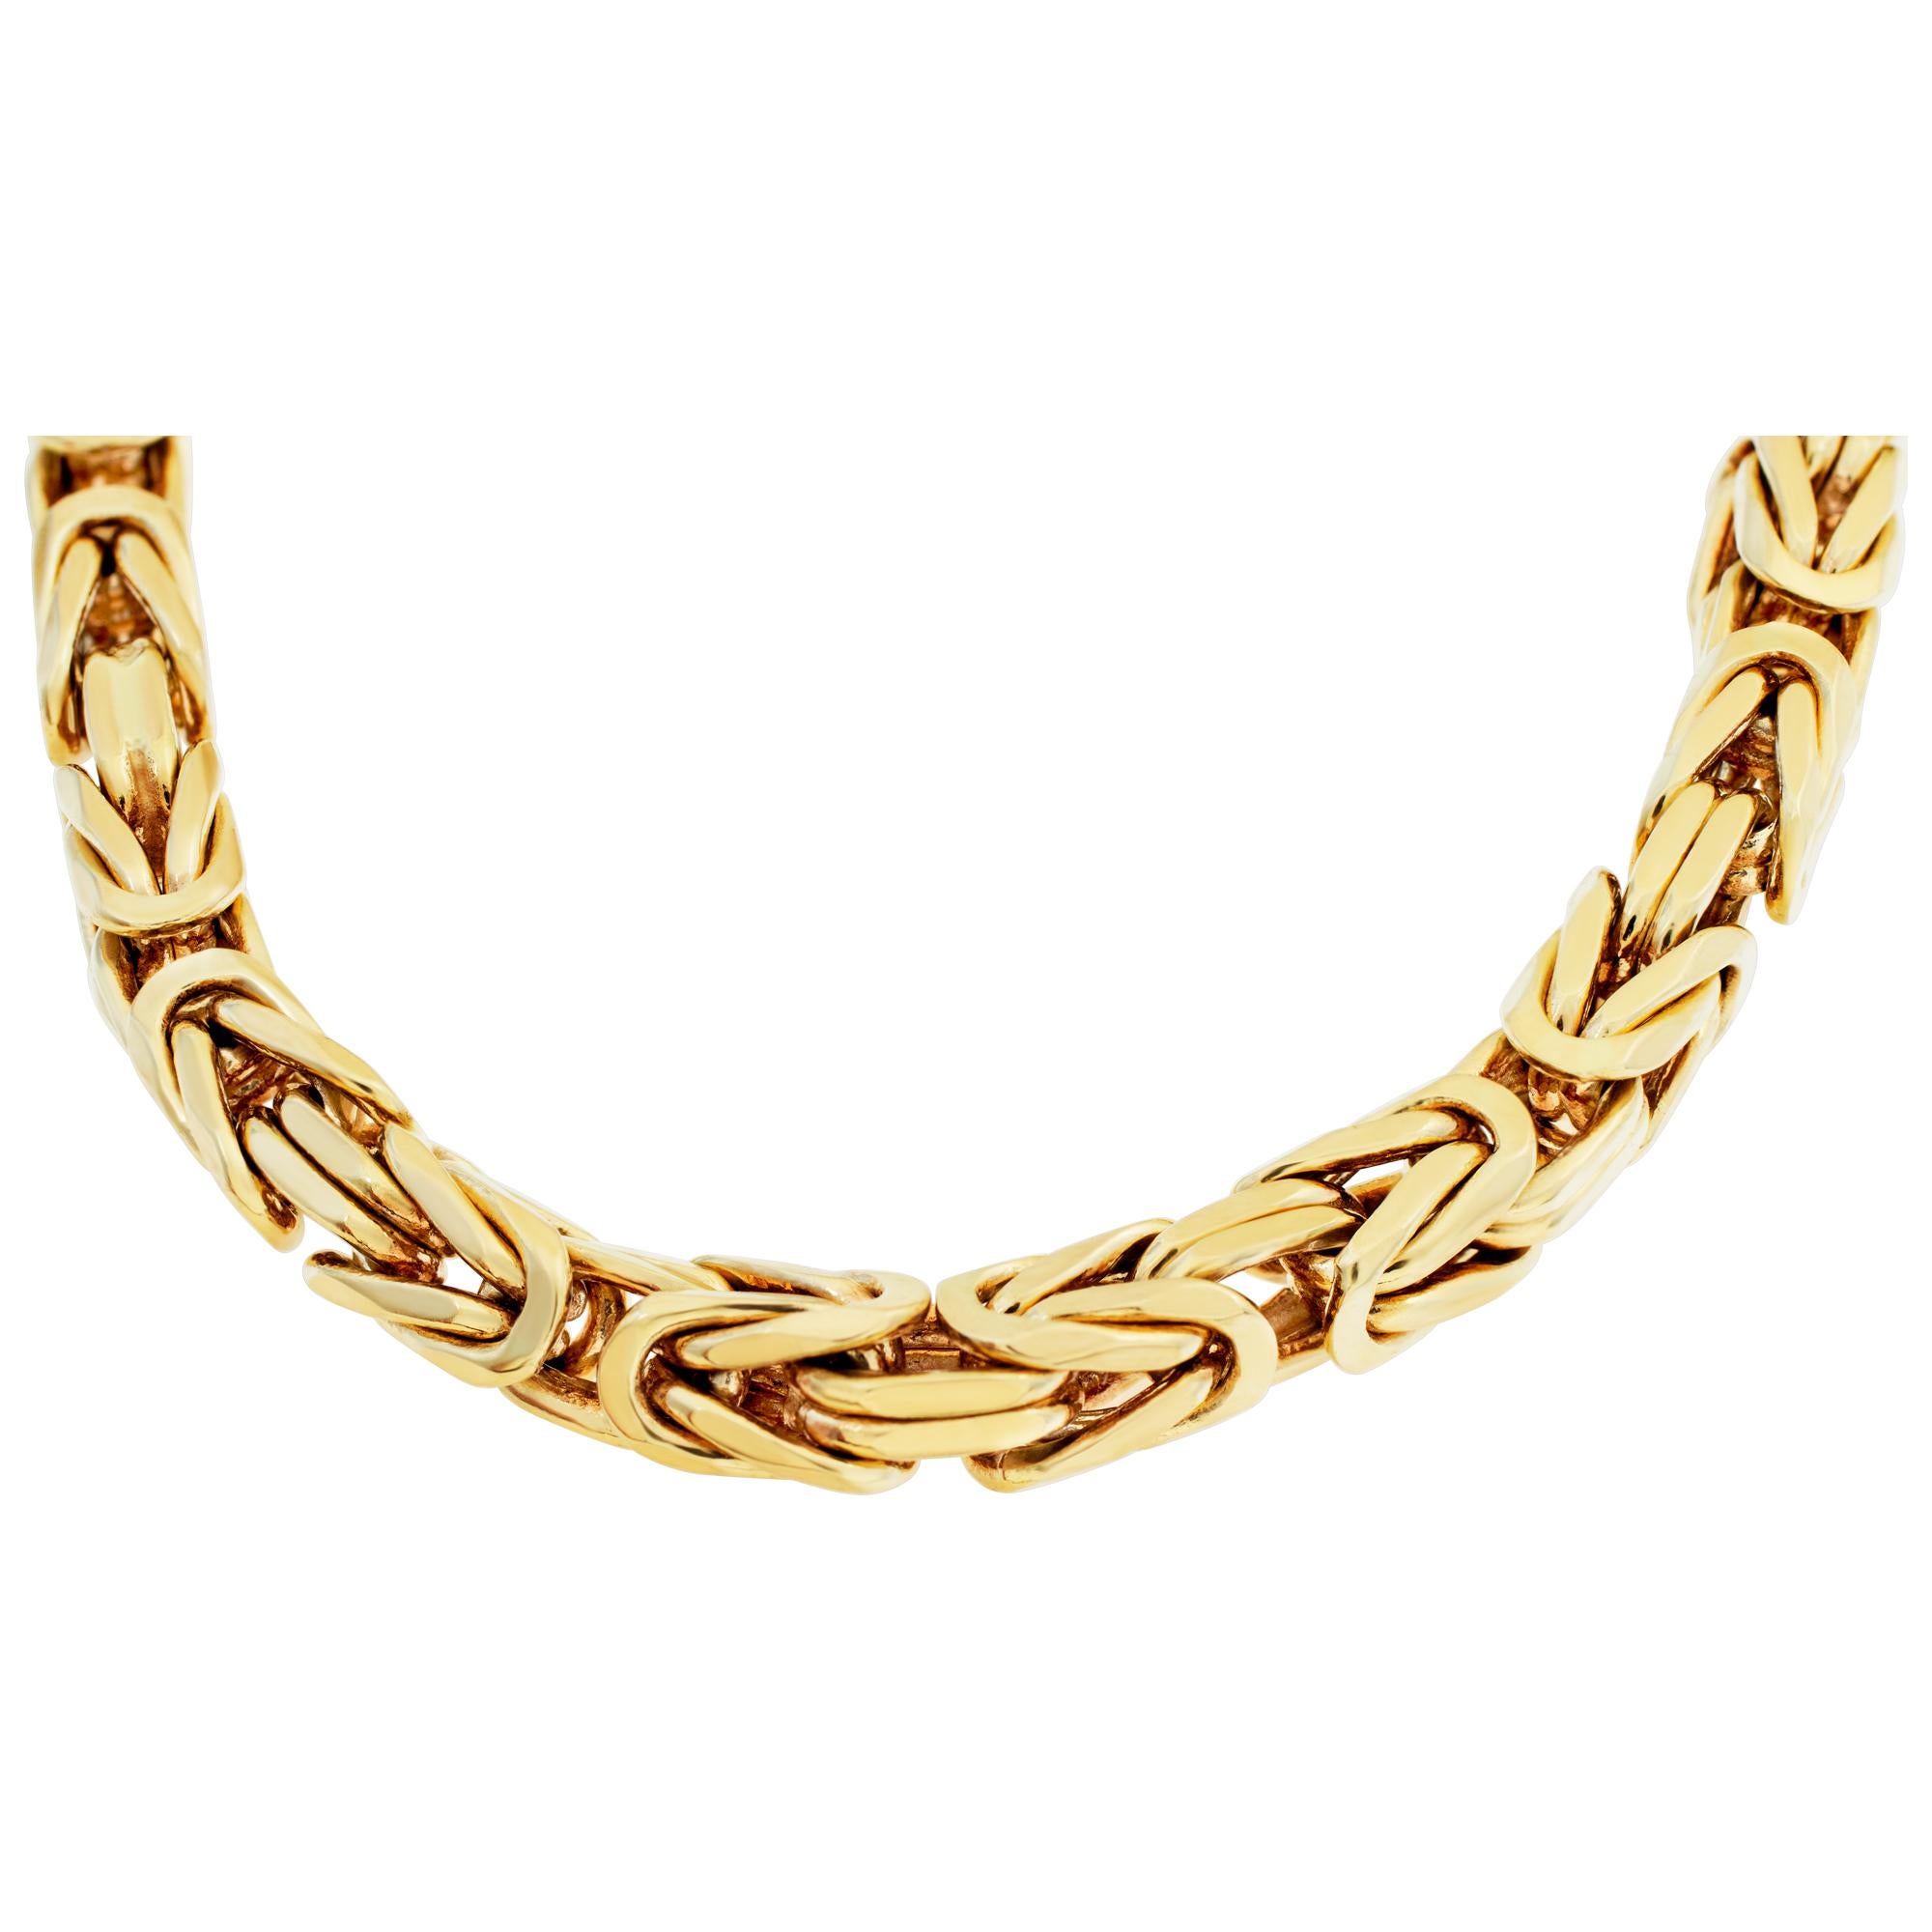 18K Byzantine Square link bracelet heavy with large lobster clasp. 9'' length. 4.2 mm width.